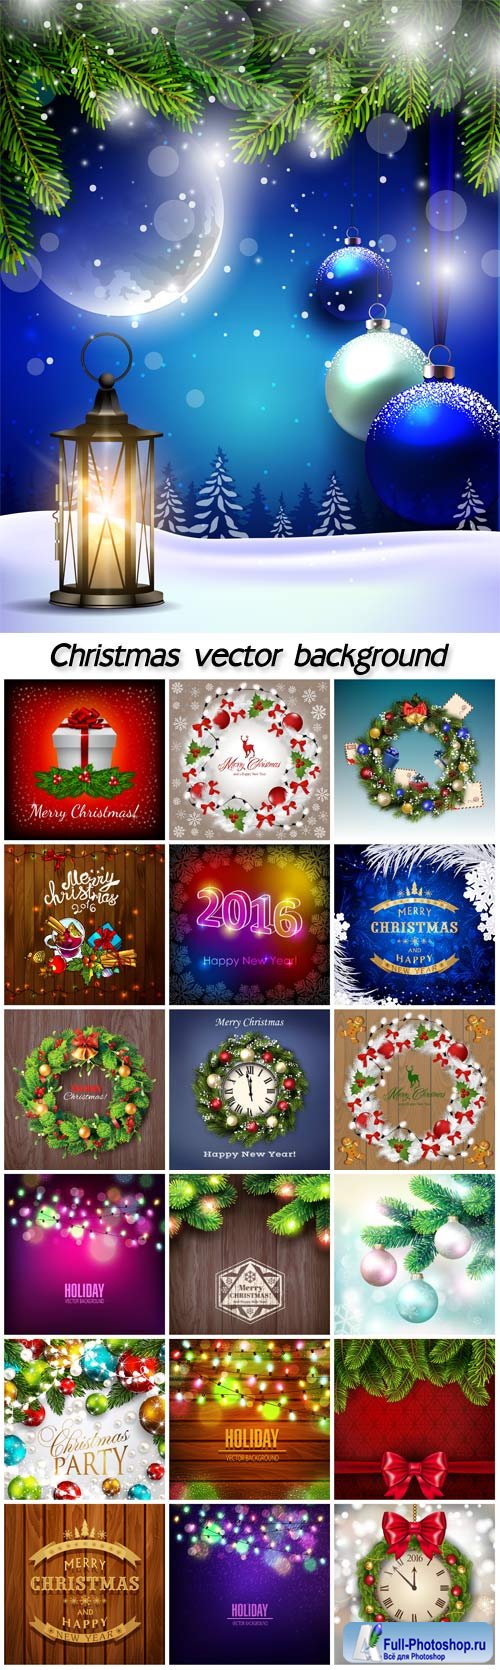 Christmas vector backgrounds with beautiful decorations